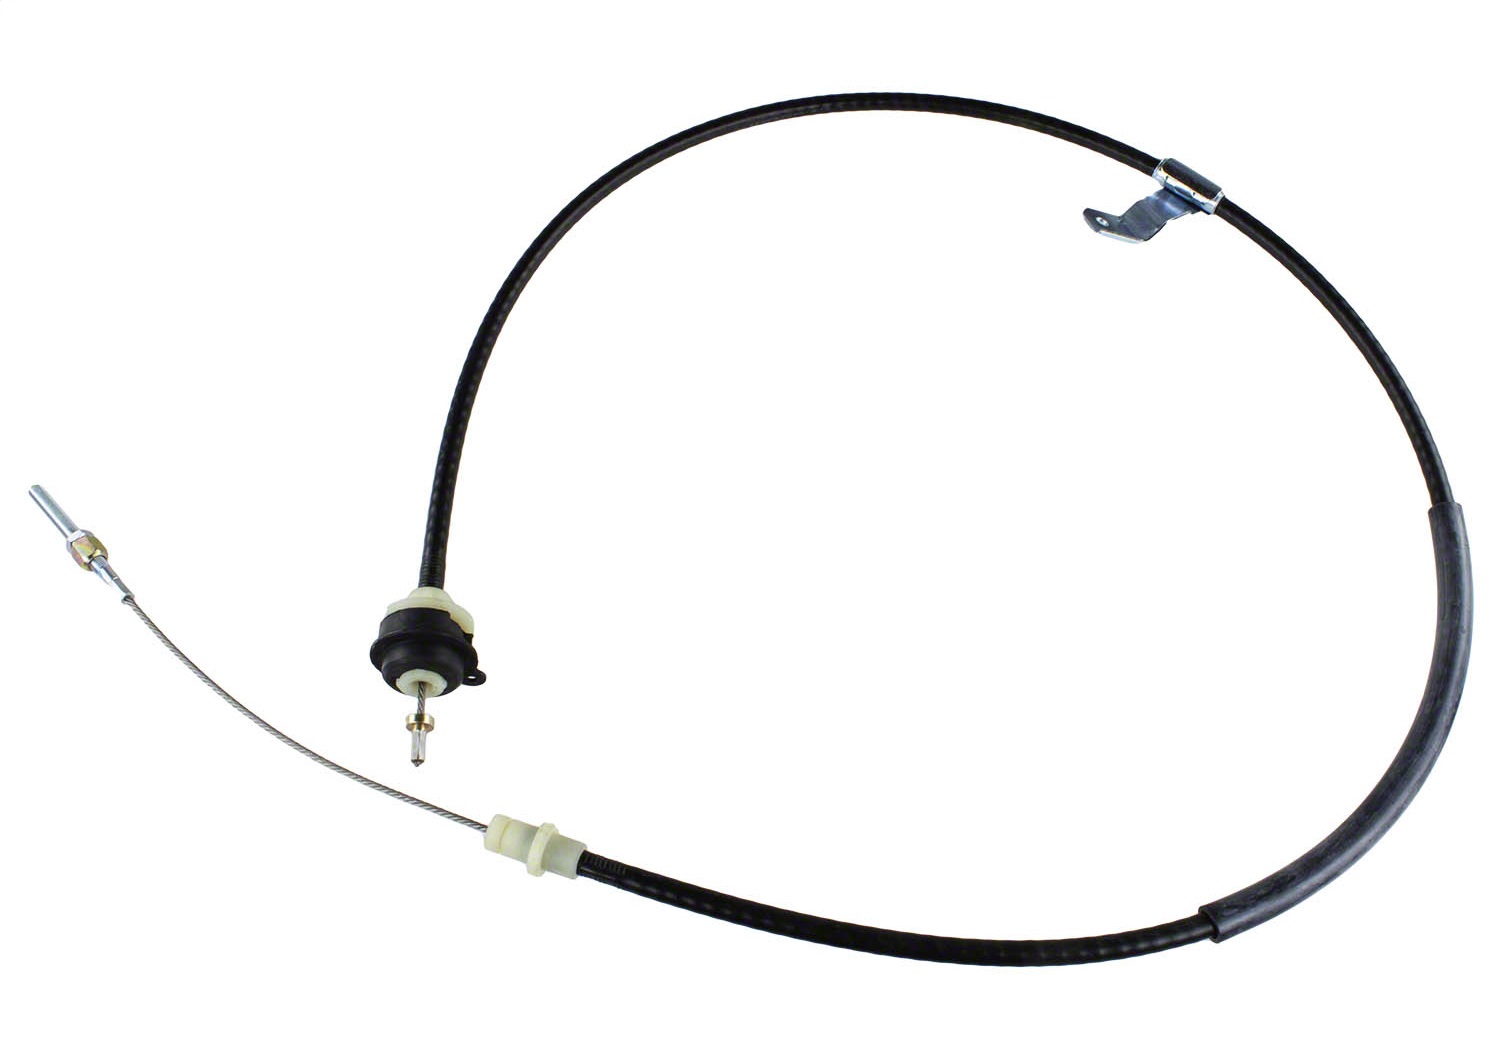 Ford Racing Ford Racing M-7553-E302 Clutch Cable Fits 96-04 Mustang